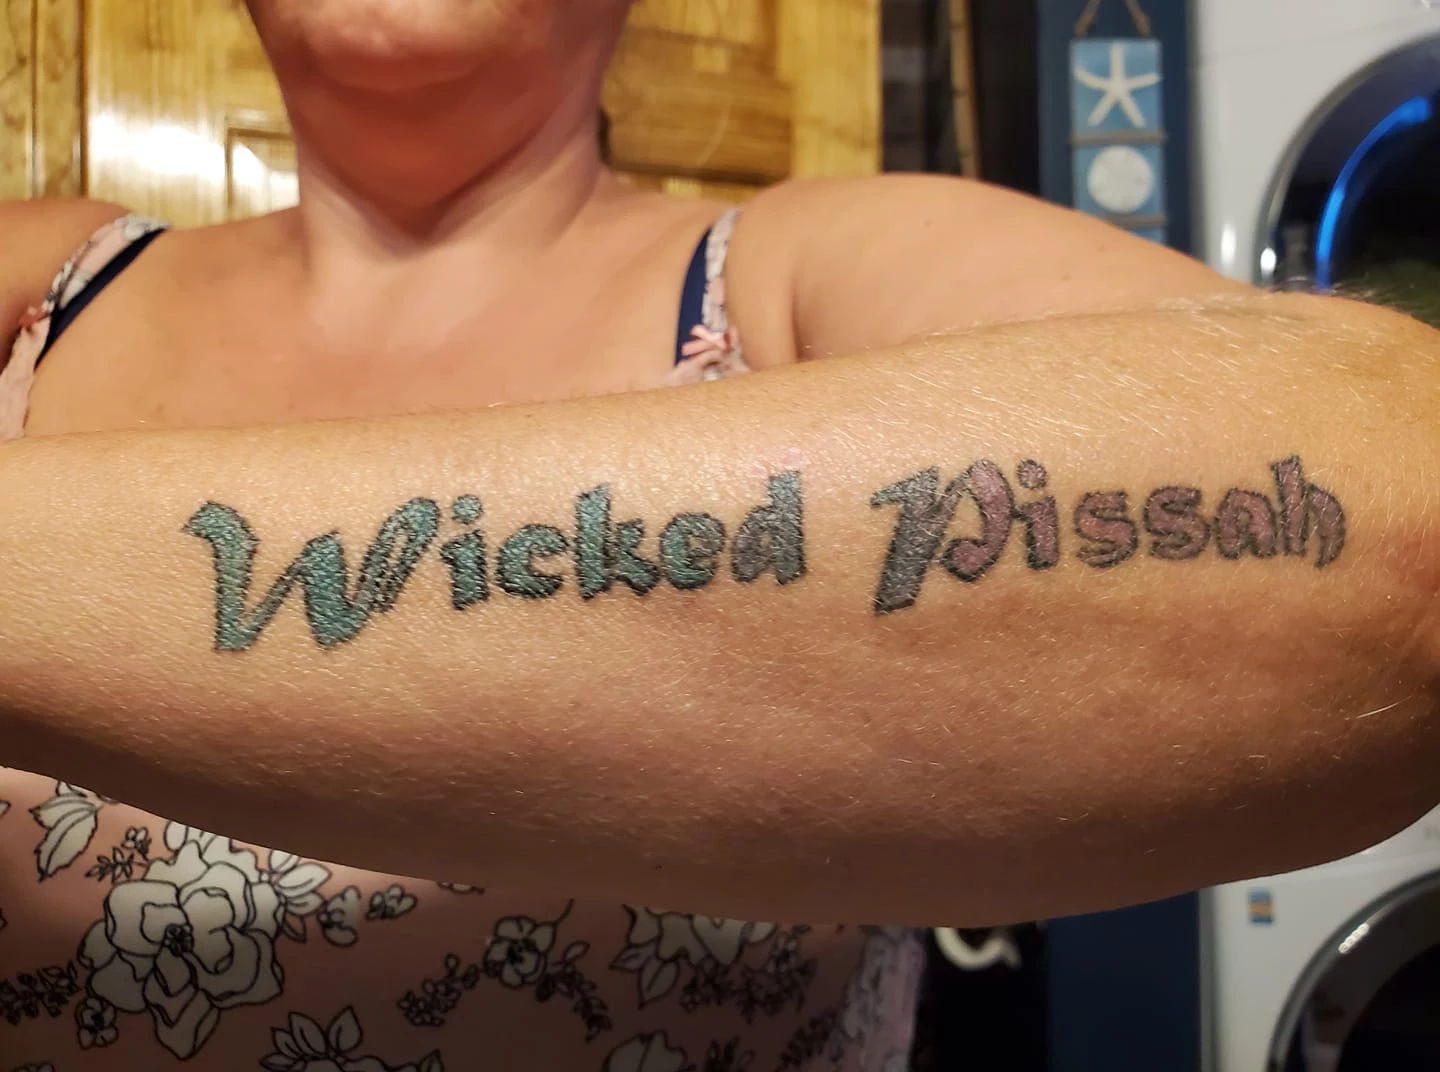 Aint no Rest For the Wicked Tattoo by bellarenee8 on DeviantArt